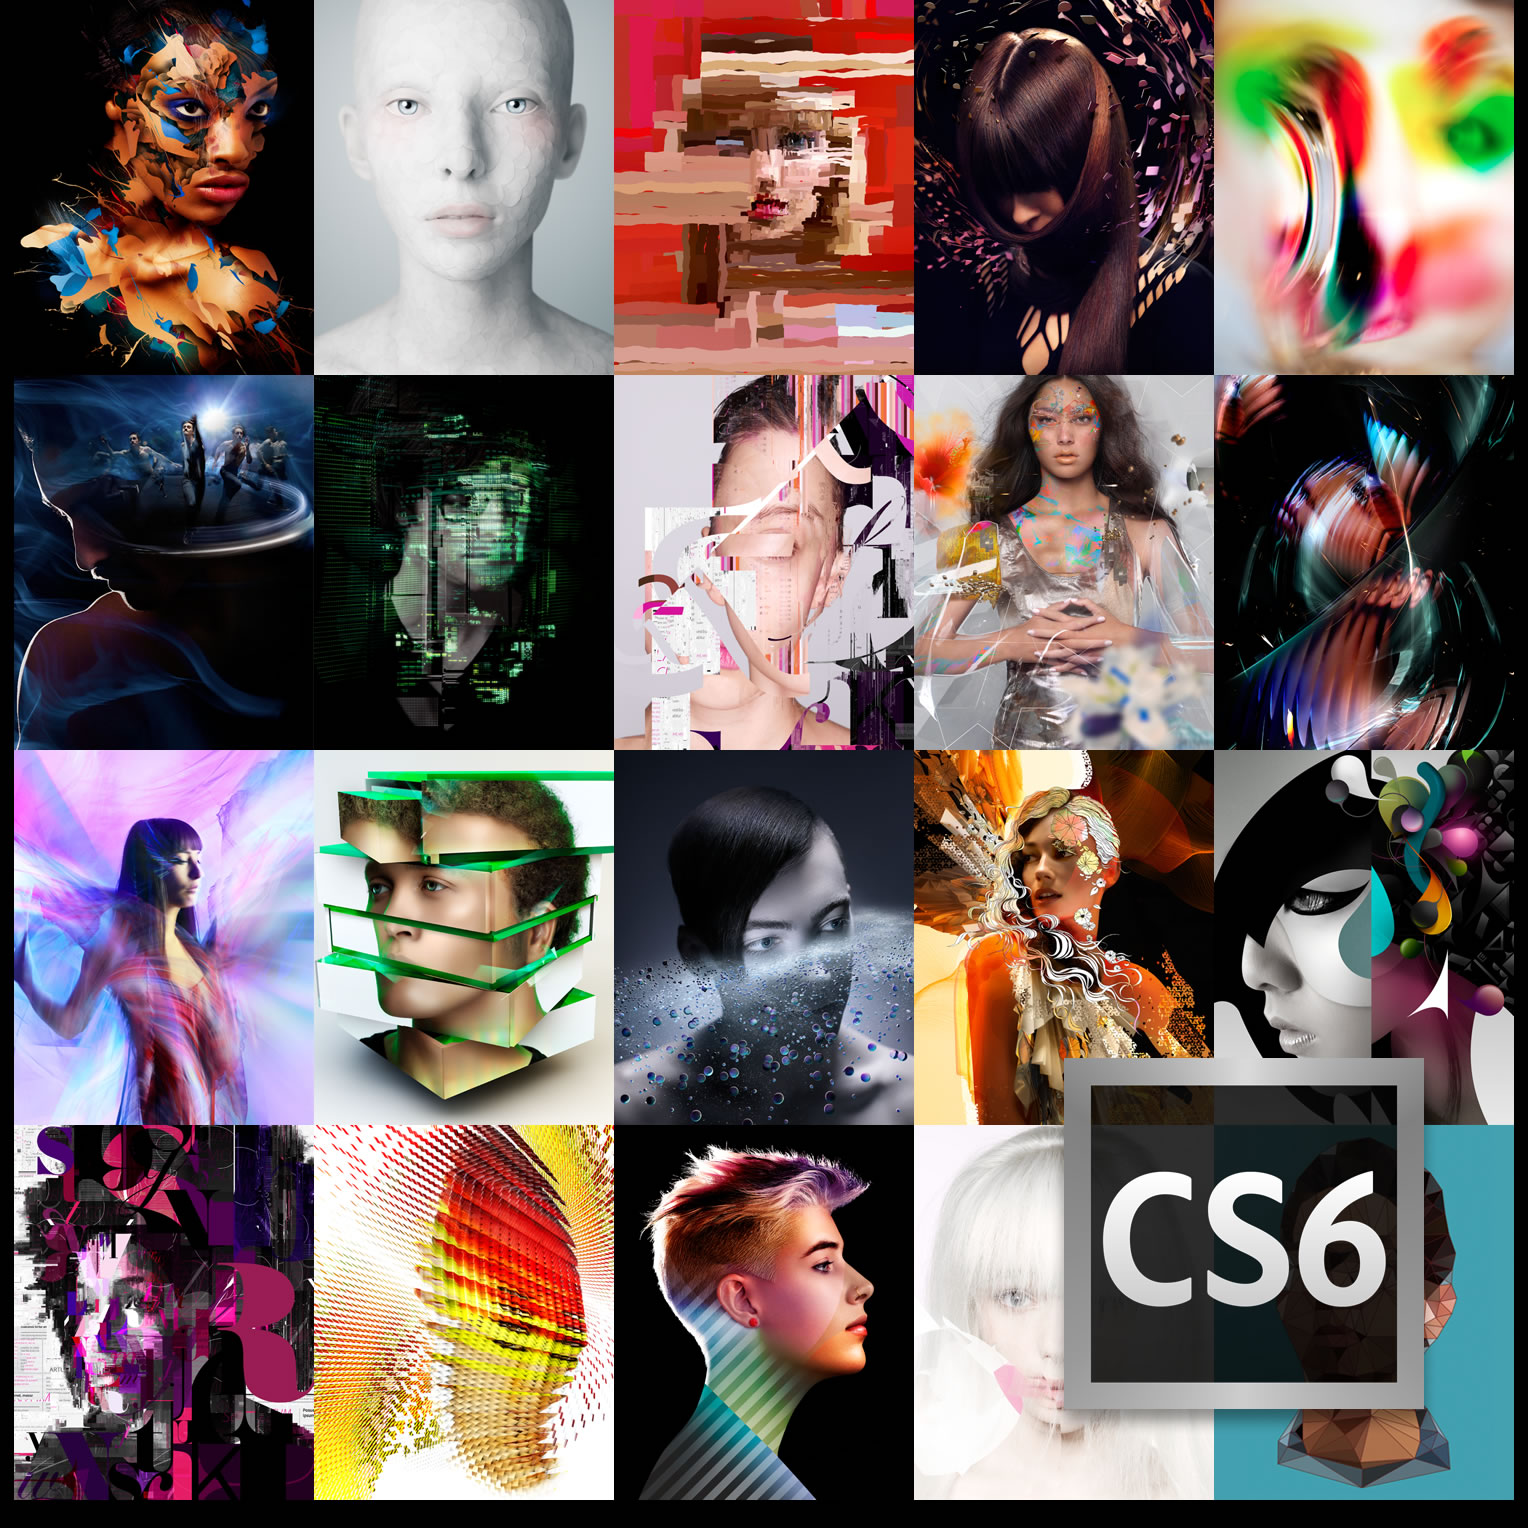 Adobe Creative Suite 6 Master Collection